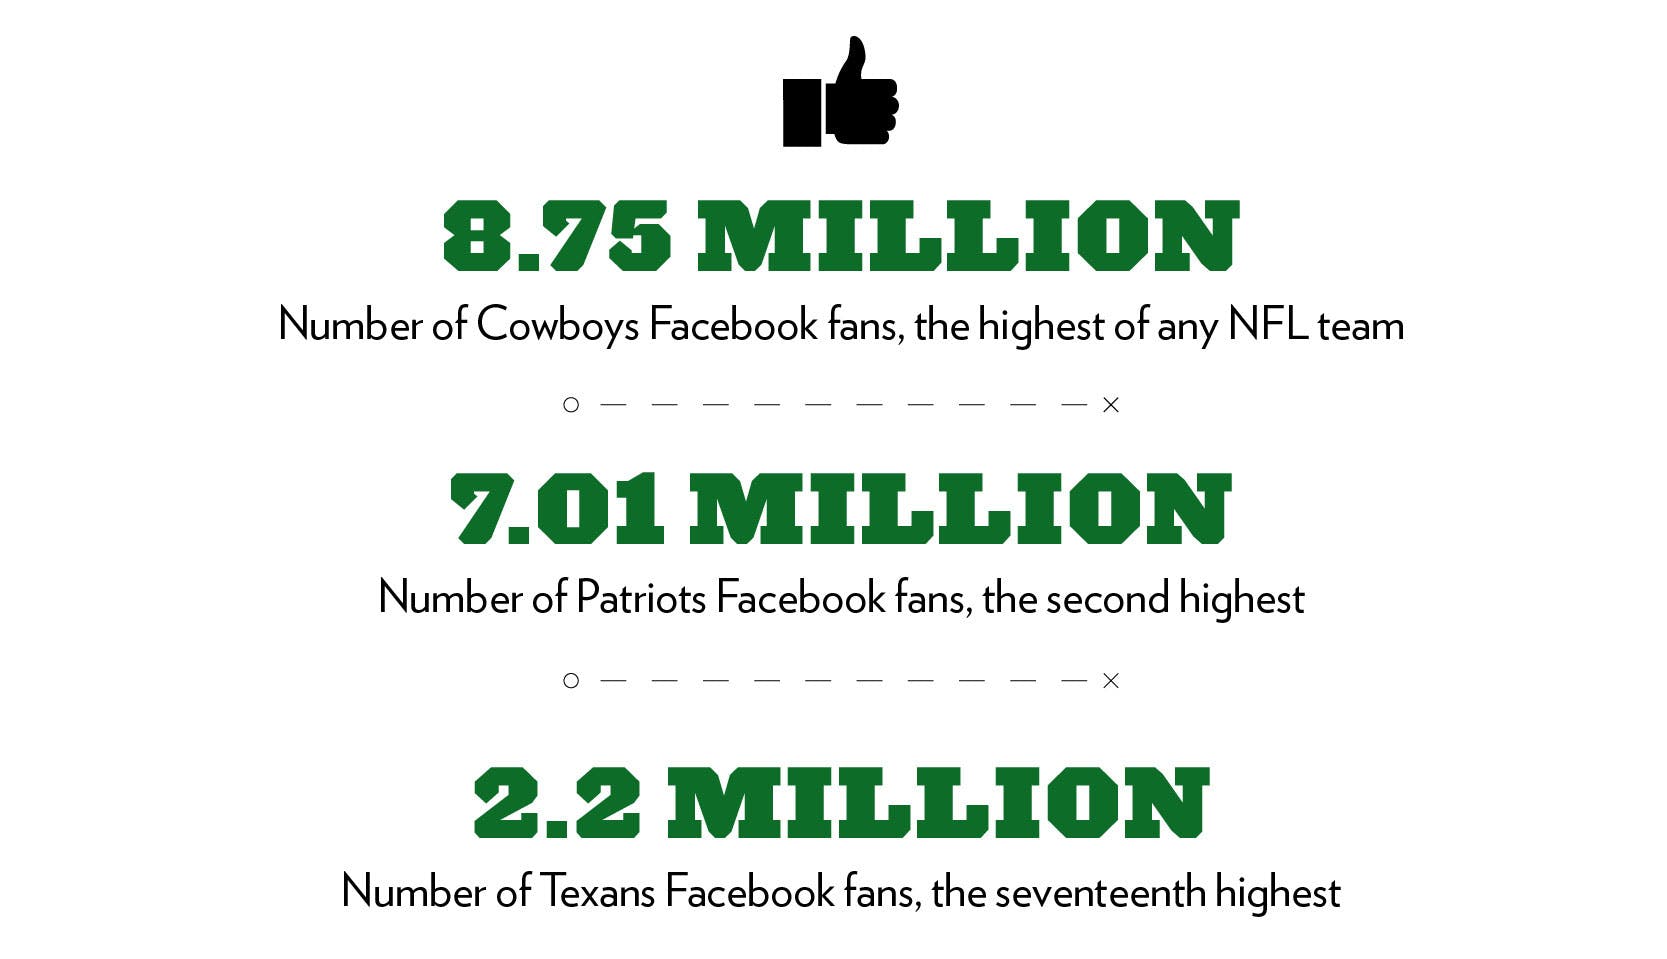 8.75 million: Number of Cowboys Facebook fans, the highest of any NFL team. 7.01 million: Number of Patriots Facebook fans, the second highest. 2.2 Million: Number of Texans Facebook fans, the seventeenth highest.